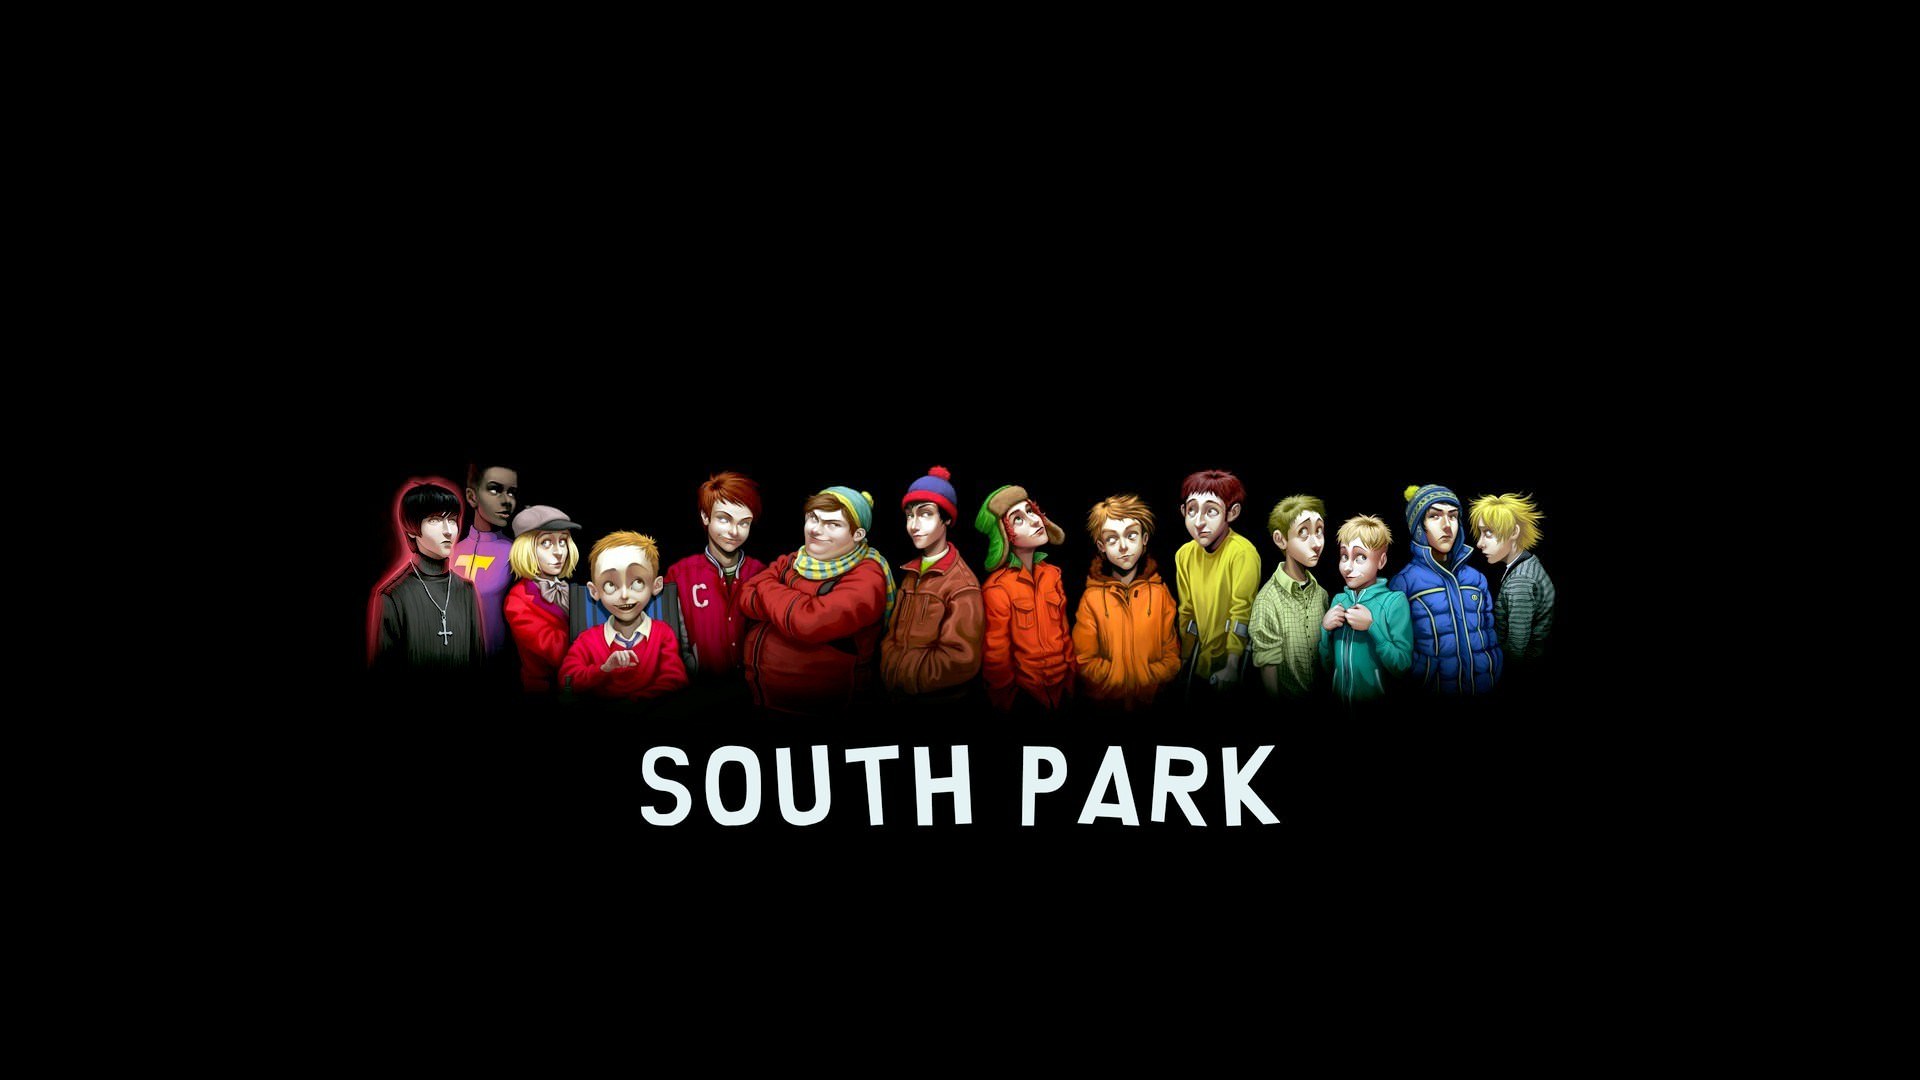 South Park Wallpapers HD A23